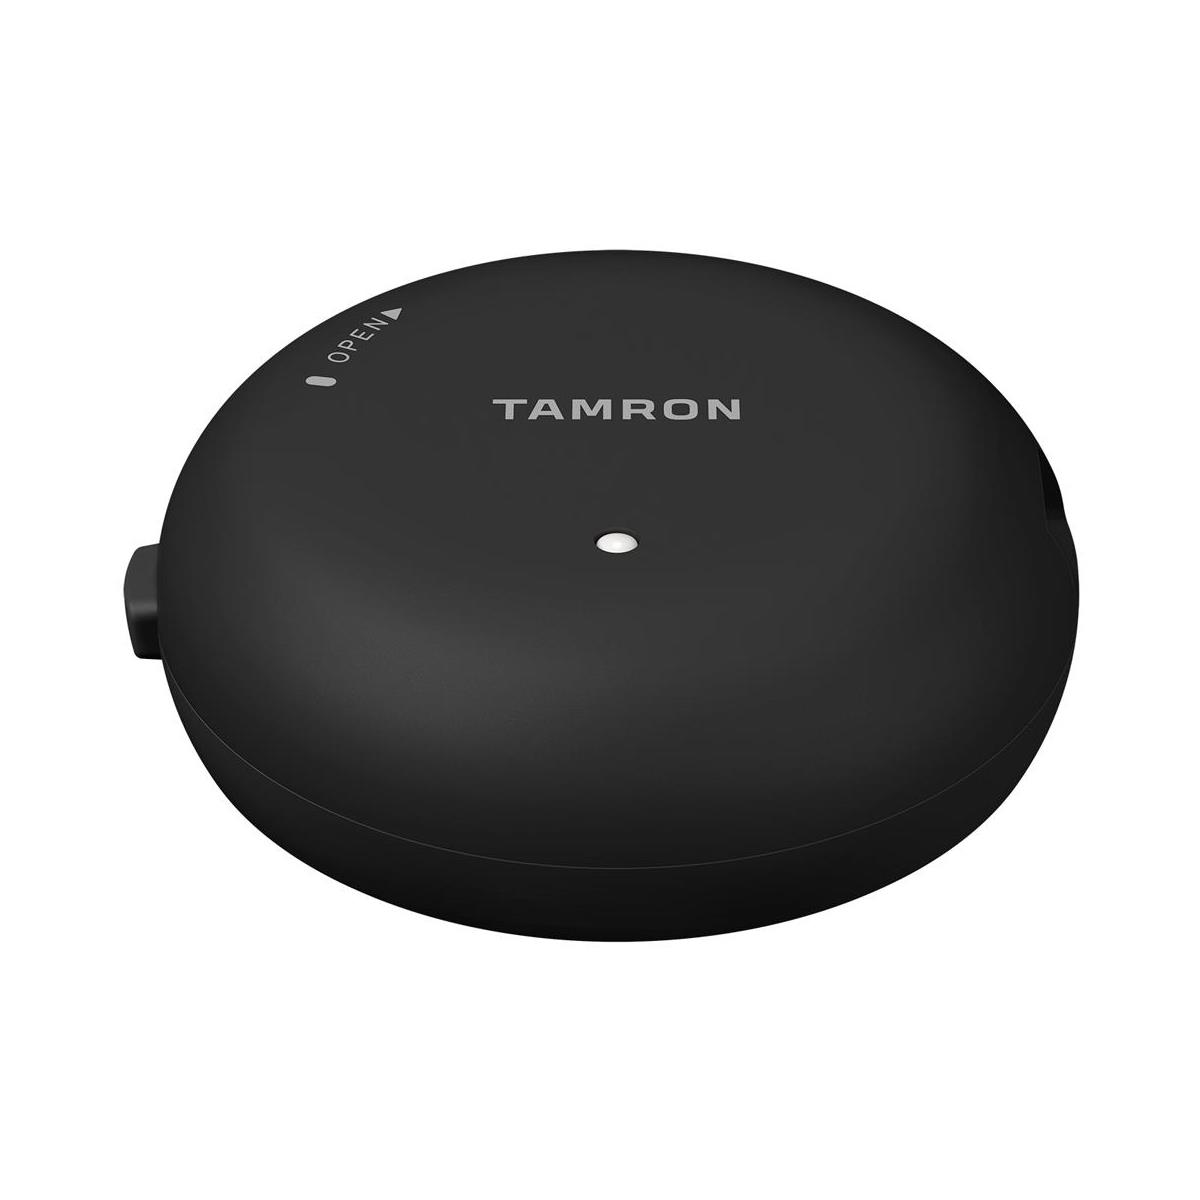 Tamron TAP-in Console for Canon EF Lens